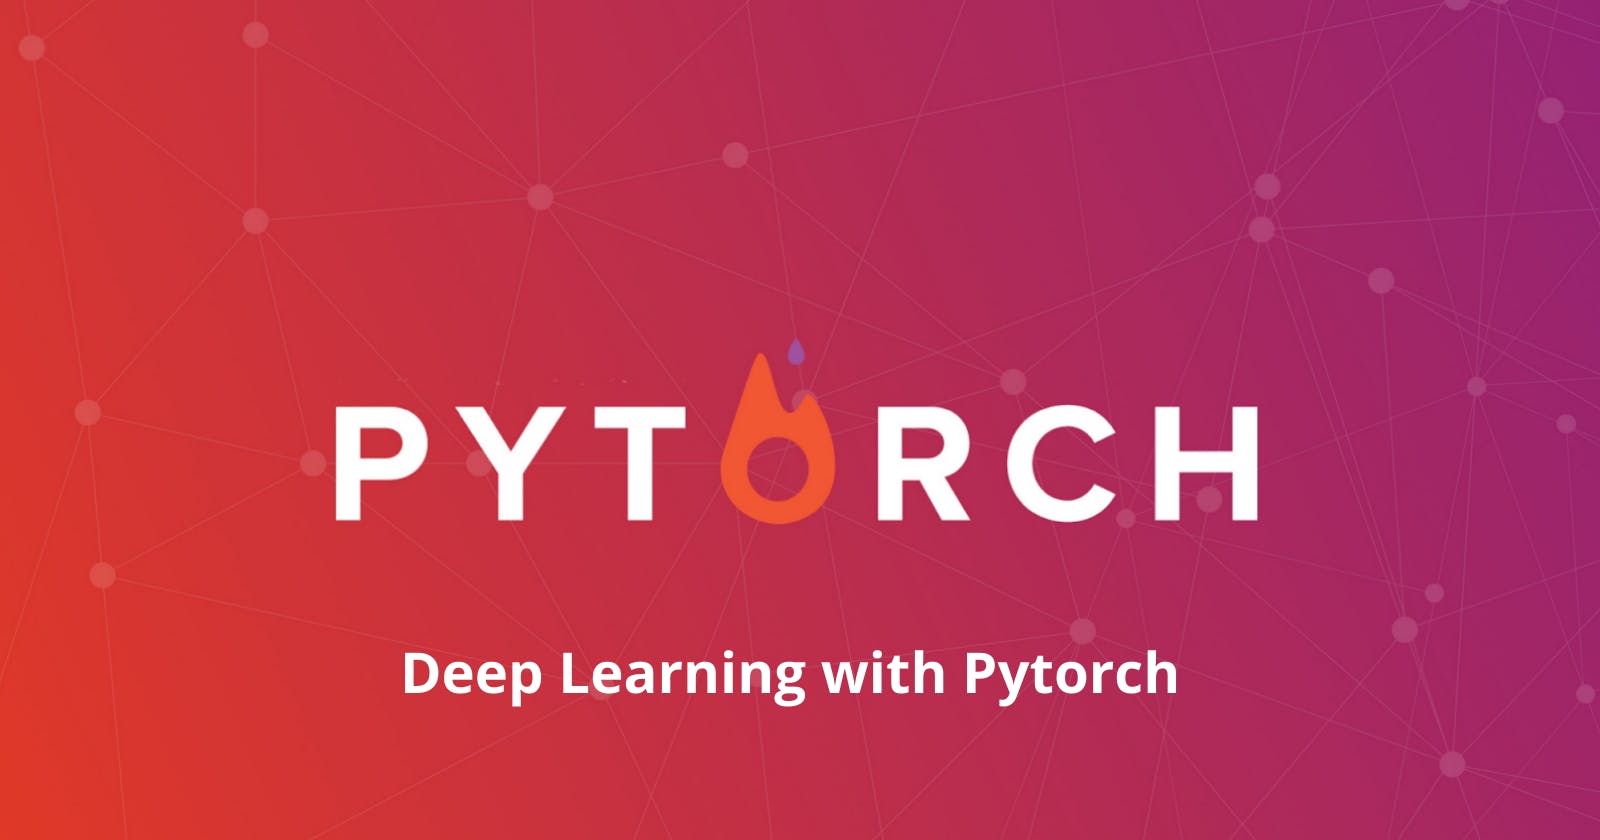 Step By Step Explanation To Pytorch For Deep Learning